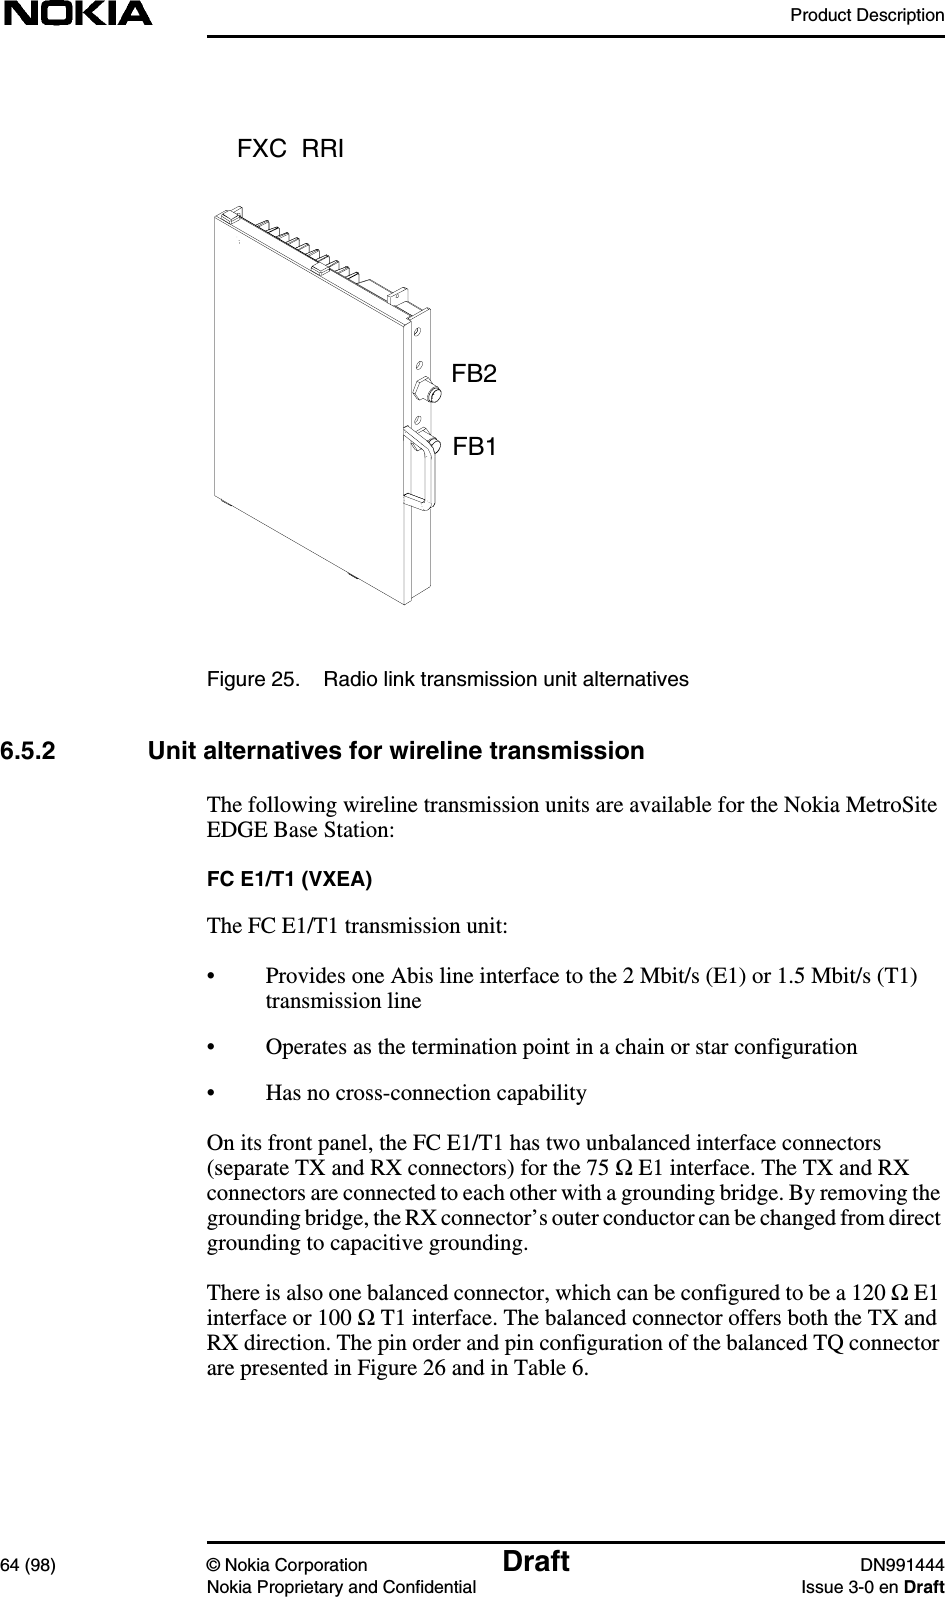 Product Description64 (98) © Nokia Corporation Draft DN991444Nokia Proprietary and Confidential Issue 3-0 en DraftFigure 25. Radio link transmission unit alternatives6.5.2 Unit alternatives for wireline transmissionThe following wireline transmission units are available for the Nokia MetroSiteEDGE Base Station:FC E1/T1 (VXEA)The FC E1/T1 transmission unit:• Provides one Abis line interface to the 2 Mbit/s (E1) or 1.5 Mbit/s (T1)transmission line• Operates as the termination point in a chain or star configuration• Has no cross-connection capabilityOn its front panel, the FC E1/T1 has two unbalanced interface connectors(separate TX and RX connectors) for the 75 Ω E1 interface. The TX and RXconnectors are connected to each other with a grounding bridge. By removing thegrounding bridge, the RX connector’s outer conductor can be changed from directgrounding to capacitive grounding.There is also one balanced connector, which can be configured to be a 120 ΩE1interface or 100 Ω T1 interface. The balanced connector offers both the TX andRX direction. The pin order and pin configuration of the balanced TQ connectorare presented in Figure 26 and in Table 6.FXC  RRIFB2FB1